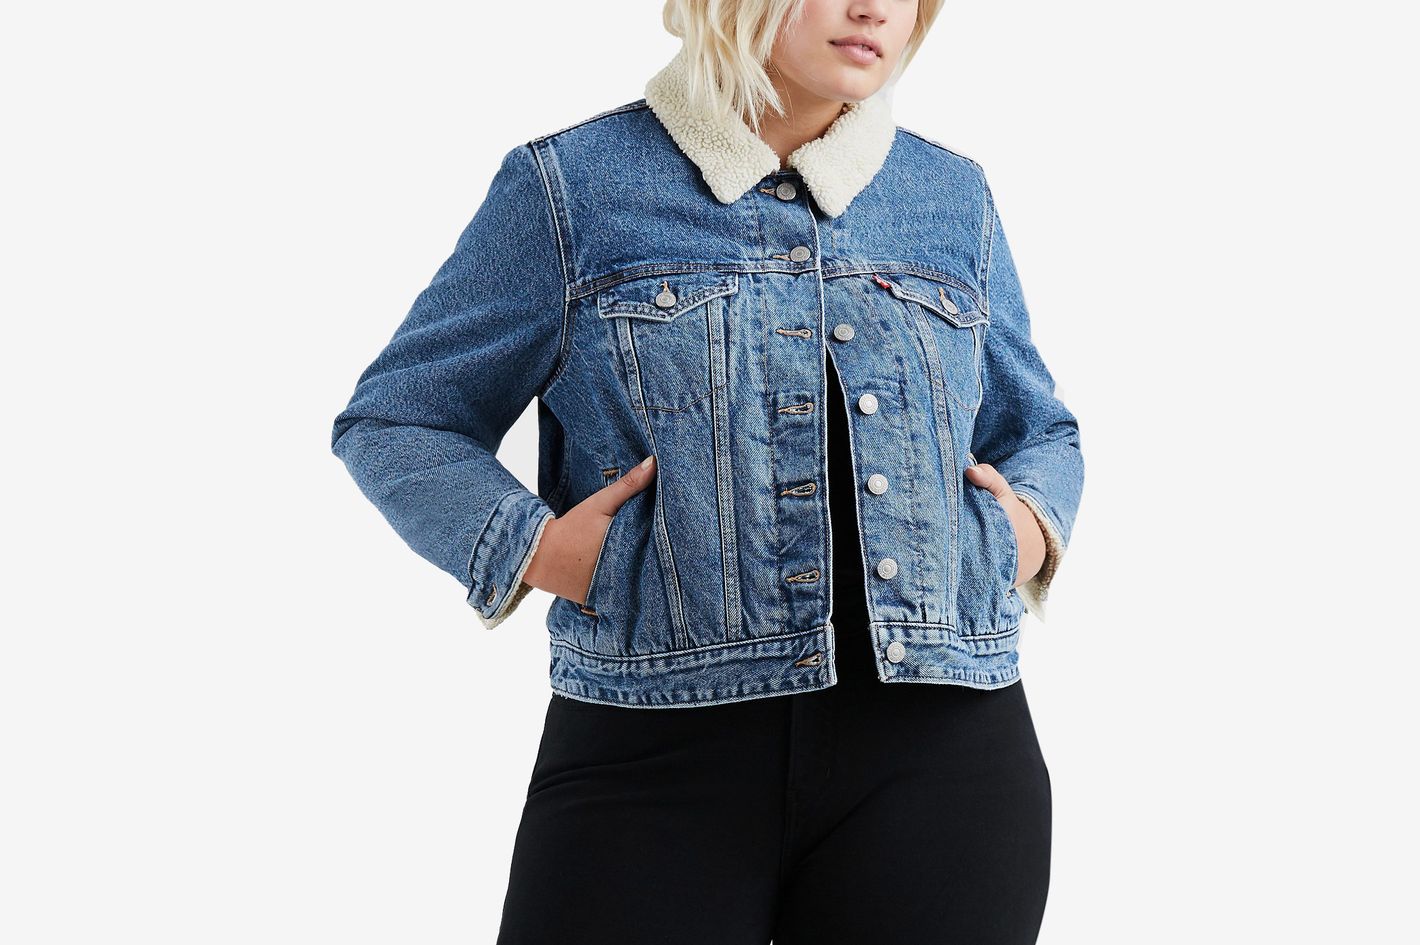 Levi's Jackets with Fleece Lining on Sale at Macy's: 2019 | The Strategist